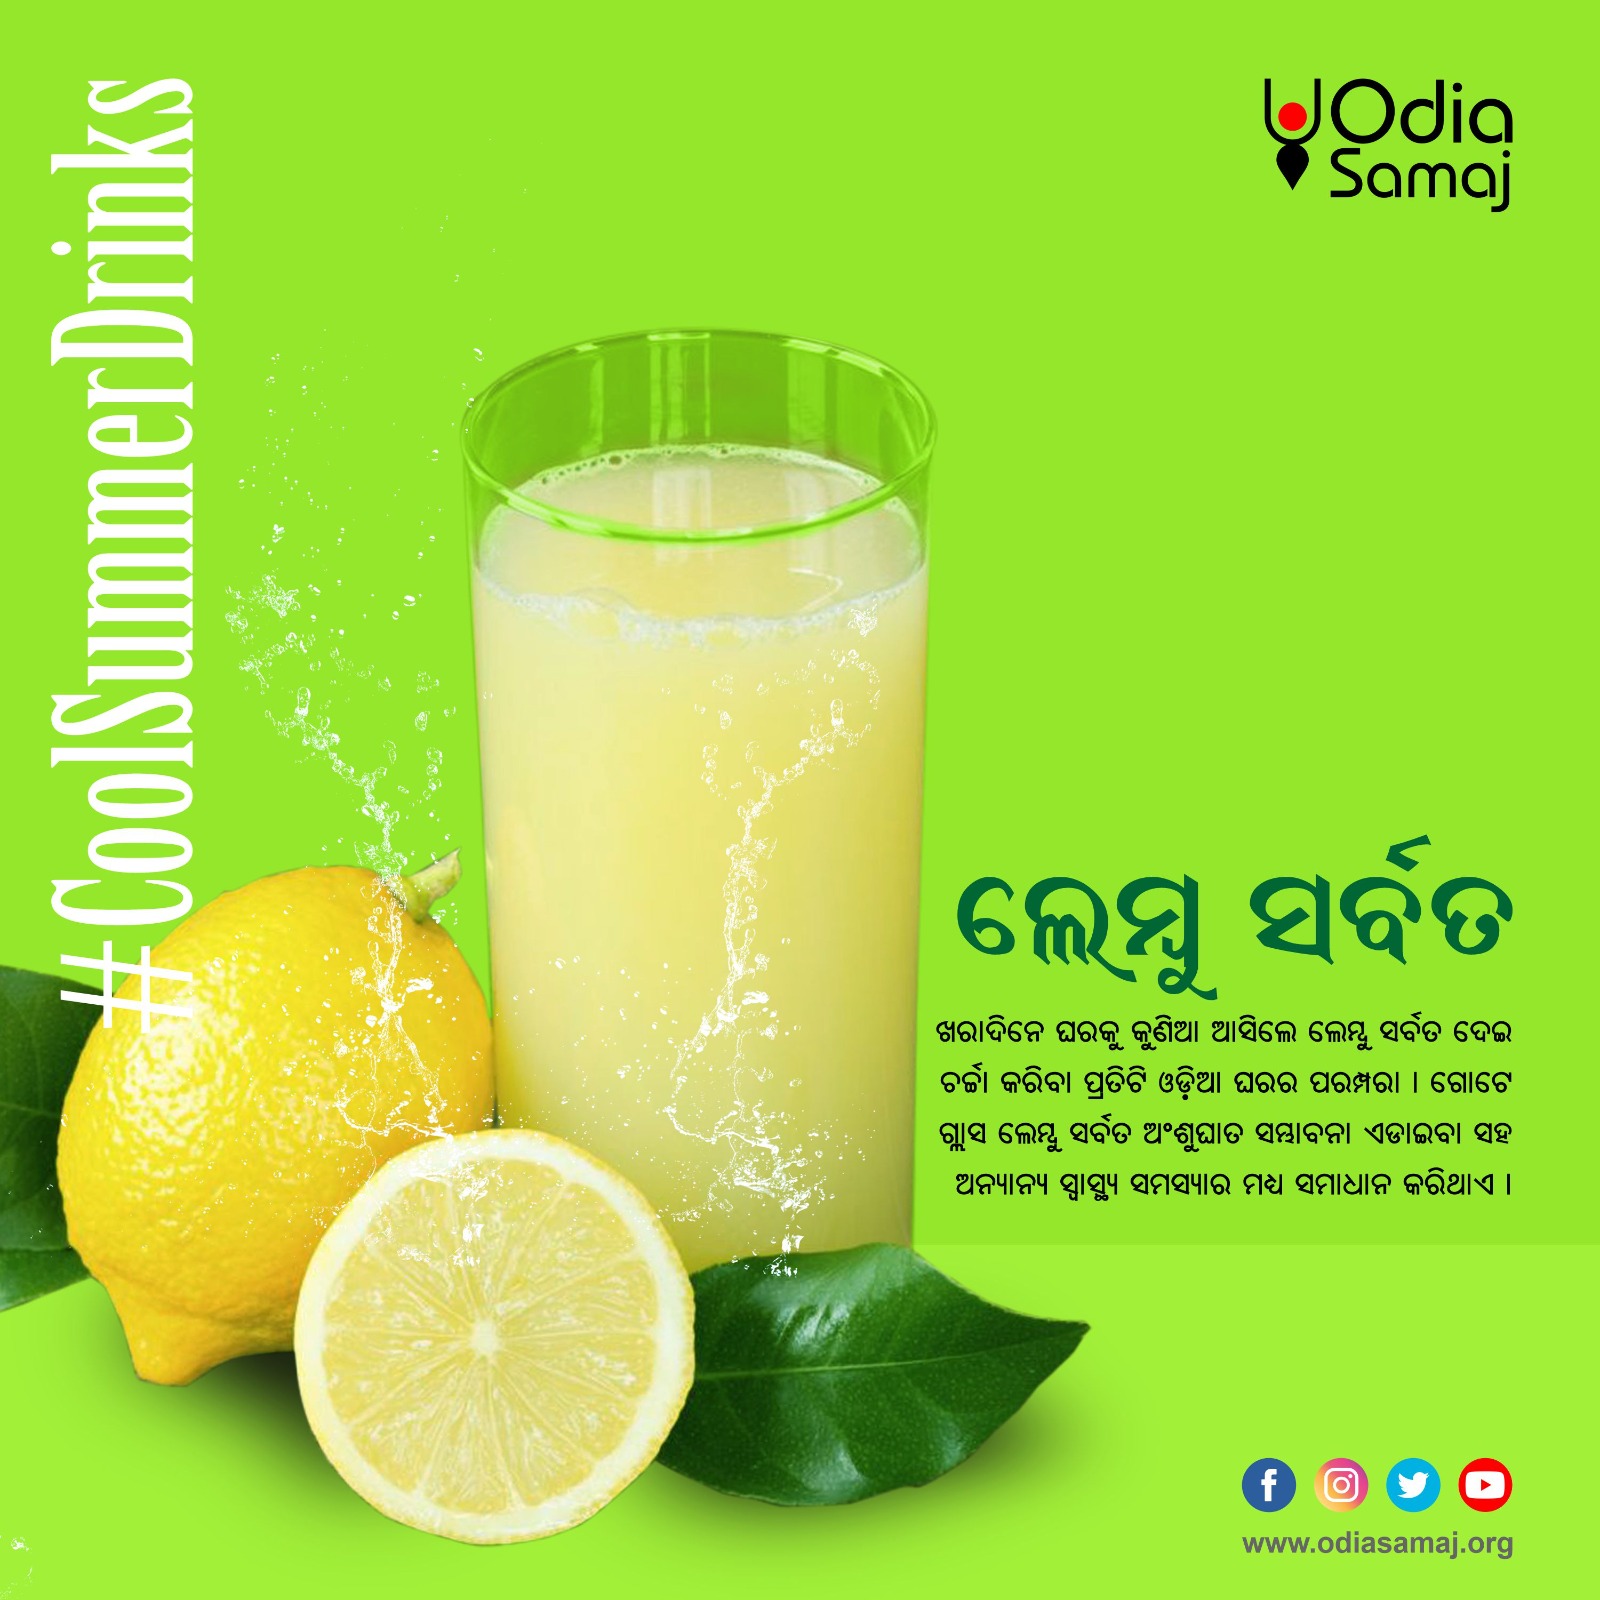 Lemon juice is one of Odia's favourite drinks in the summer.